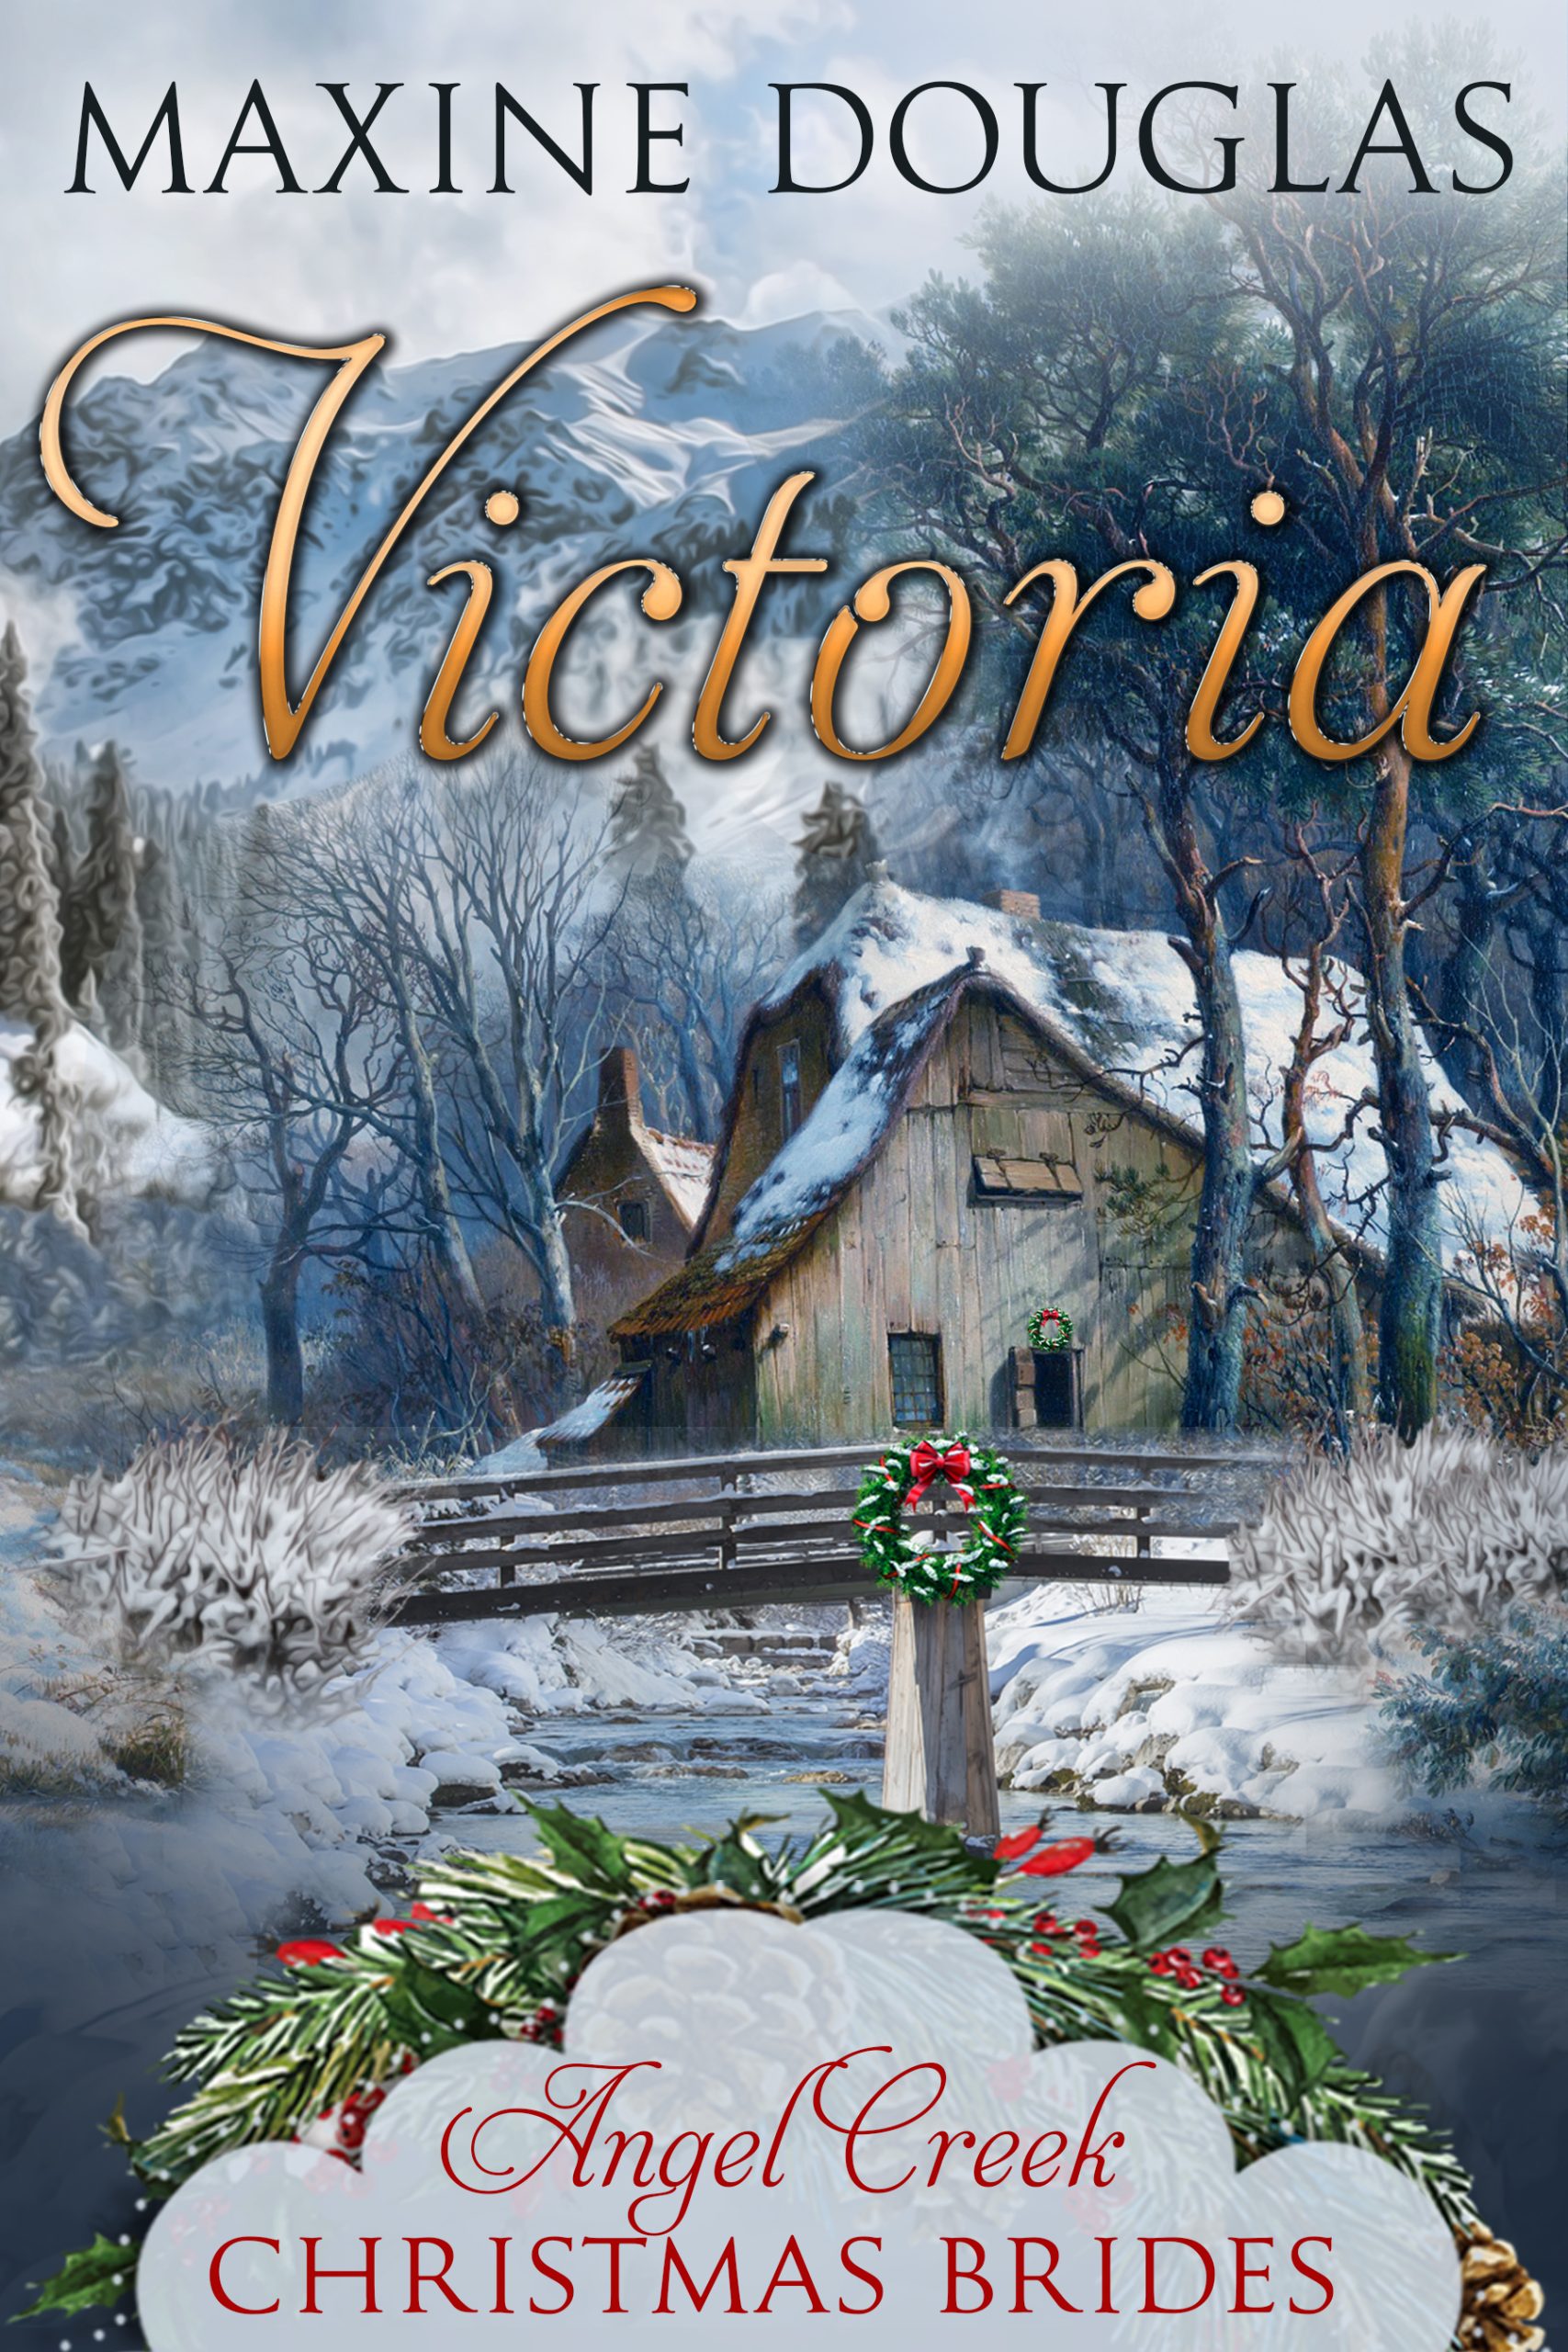 Book cover for Victoria, available to option through OptionAvenue